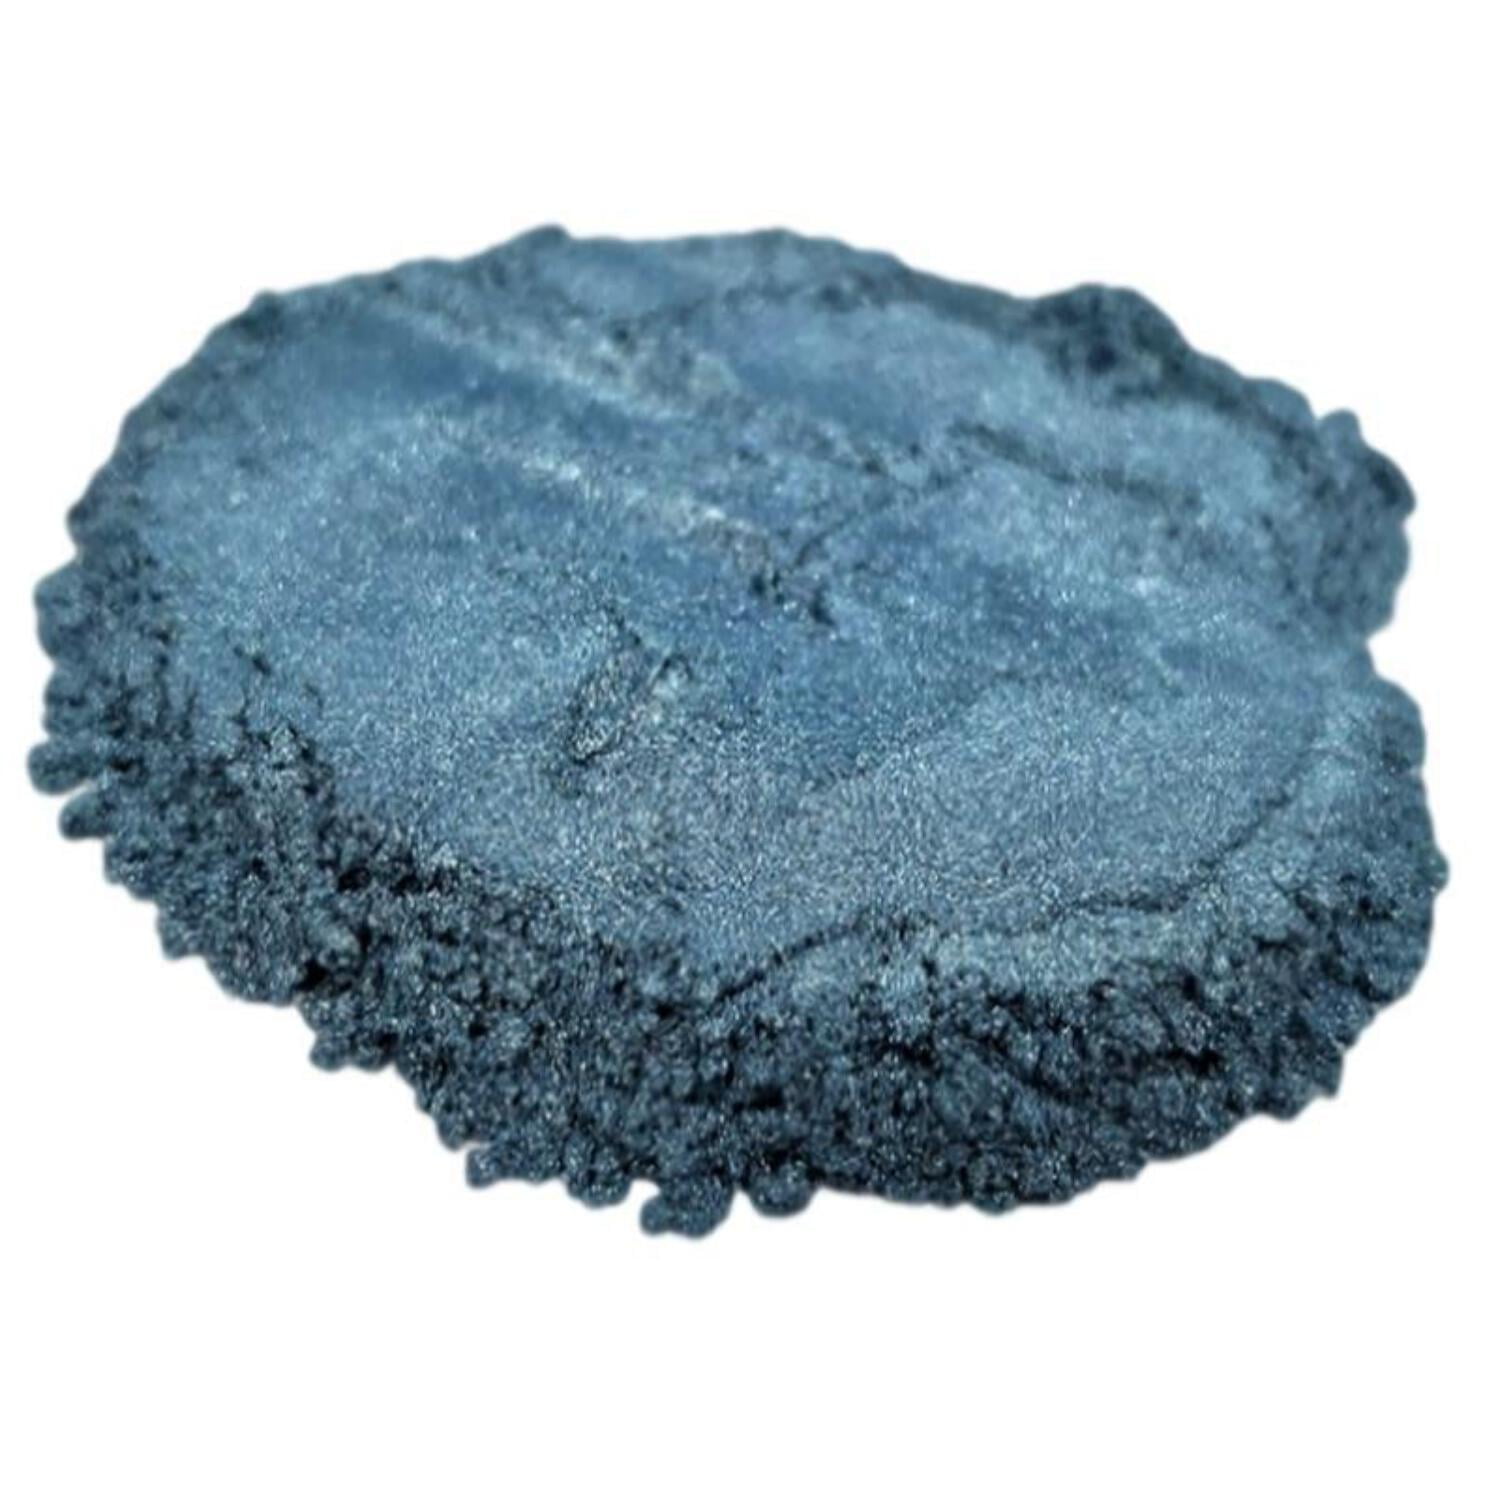 Blue Green Metallic Powder (PolyColor) Mica Powder for Epoxy Resin Kits,  Casting Resin, Tumblers, Jewelry, Dyes, and Arts and Crafts! (Color Pigment  Powder) 